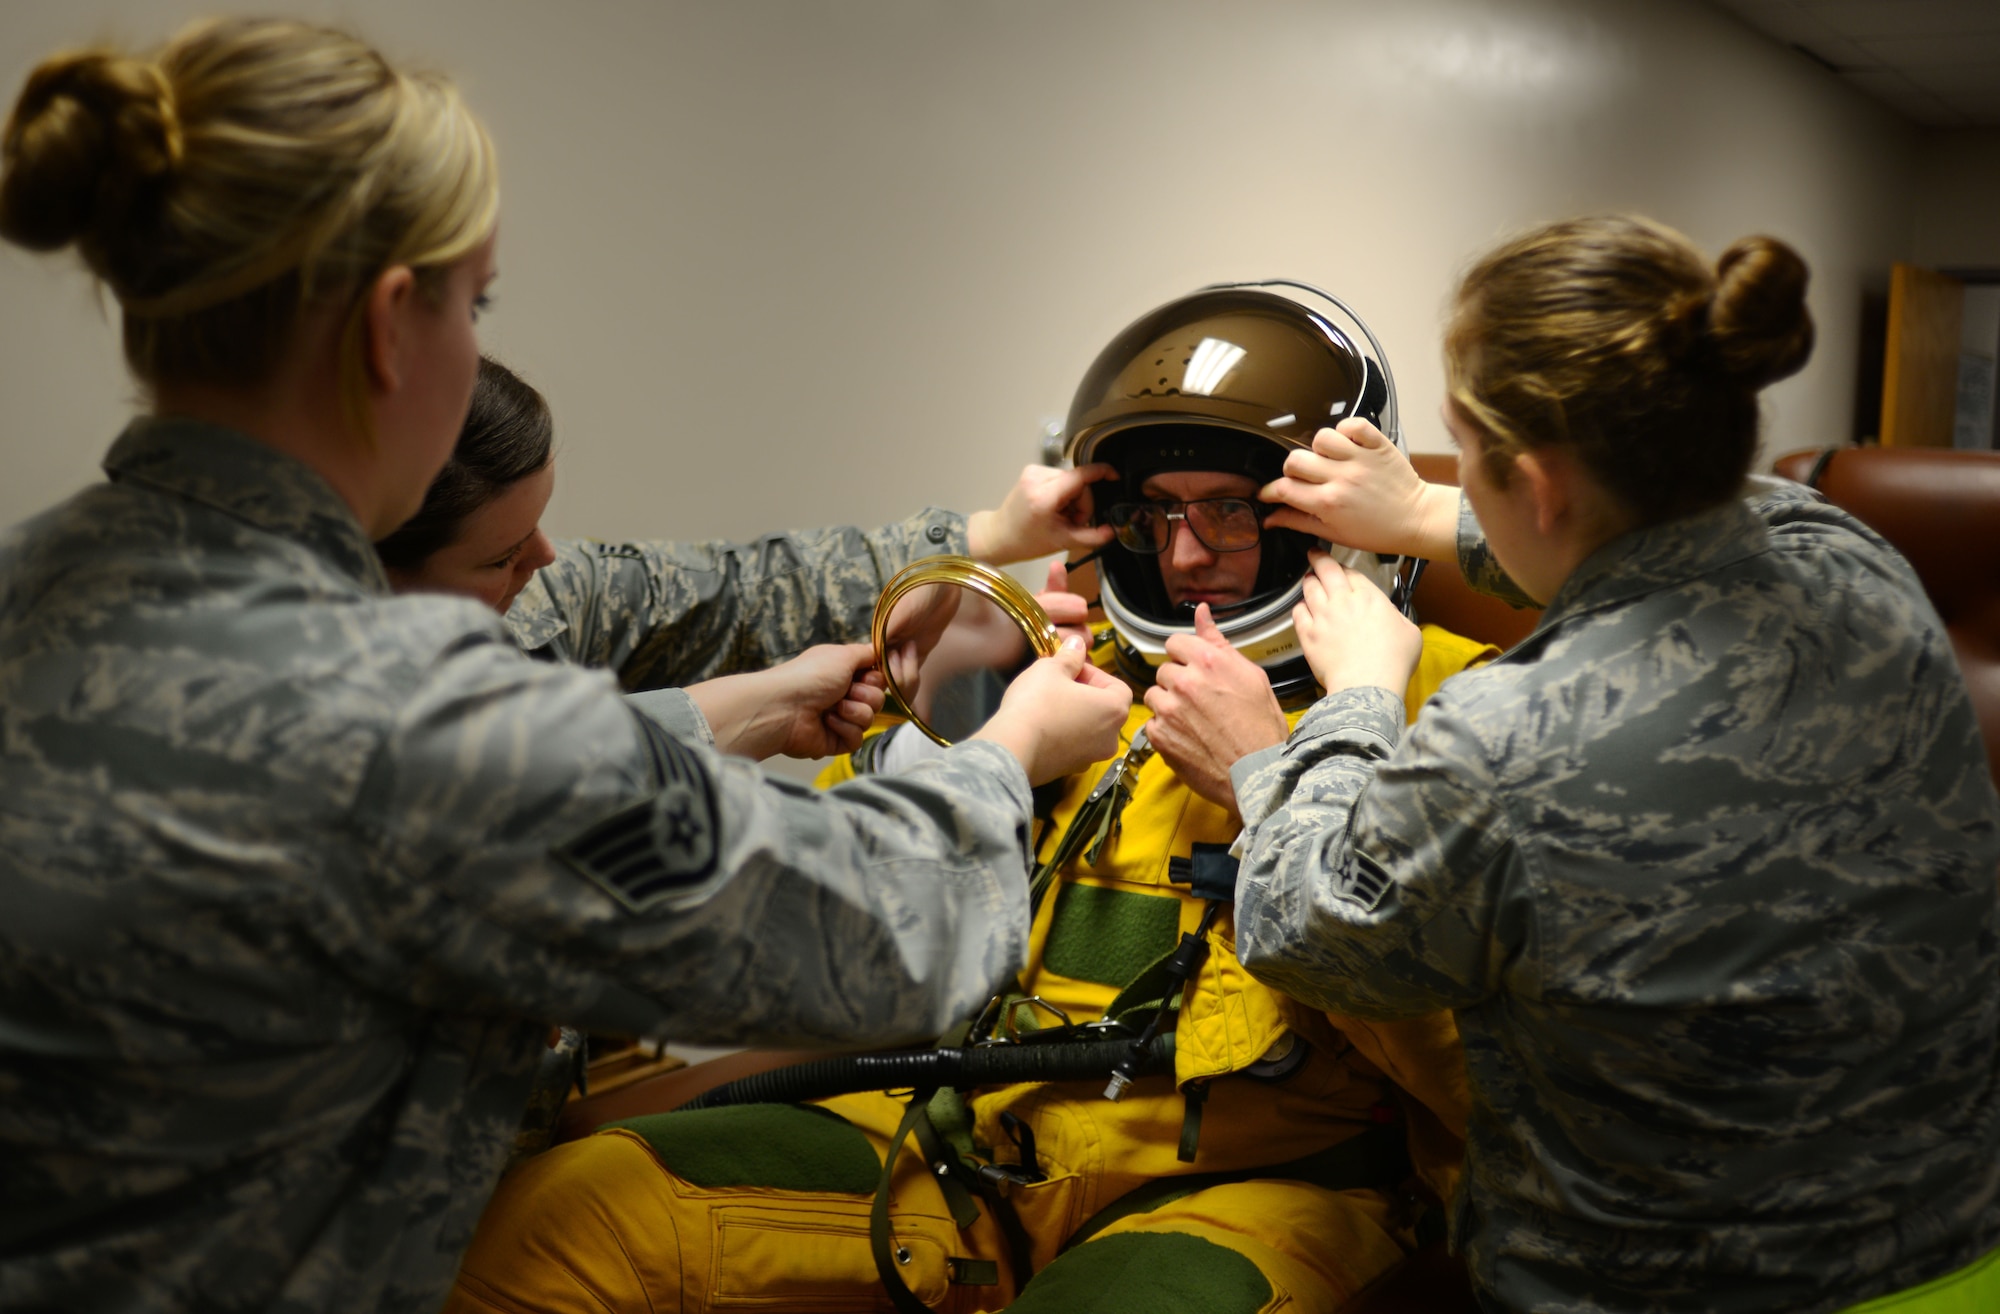 Staff Sgt. Vanessa Jordan (left ) 9th Physiological Support Squadron launch and recovery technician, uses a mirror to confirm placement of U-2 pilot Capt. Travis’ specialized glasses within his helmet as Staff Sgt. Heather Doyle and Senior Airman Meghan Mattingly assist Jan. 8, 2013, at Beale Air Force Base, Calif. Dawning of the highly specialized full pressure suit requires a team of physiological support personnel. The squadron is the only one of its kind in the Department of Defense, with the responsibility of ensuring survivability of the nation's team of U-2 pilots. (U.S. Air Force photo by Airman 1st Class Drew Buchanan/Released)